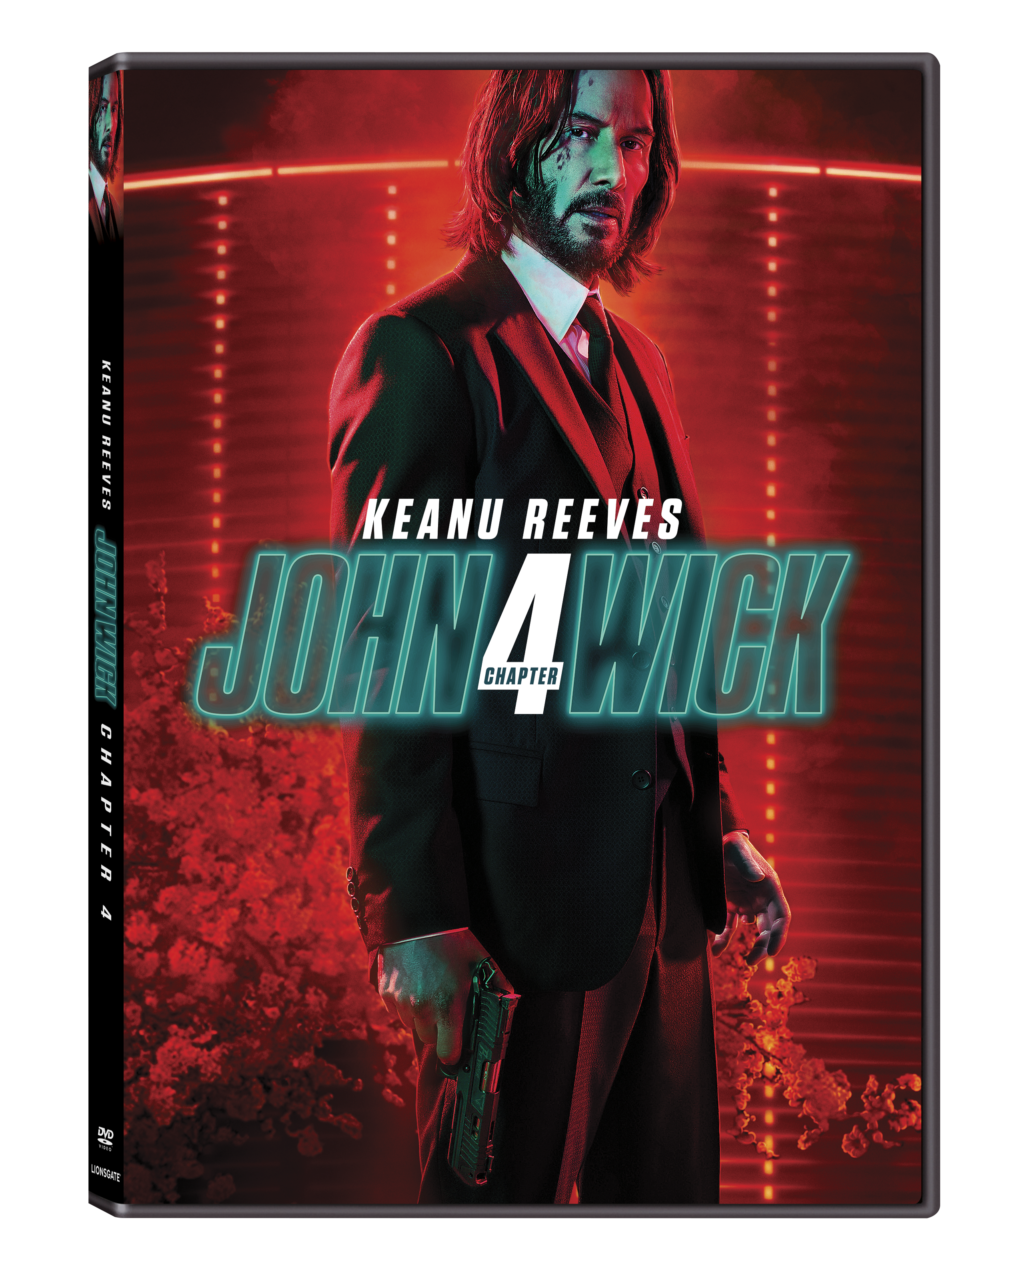 John Wick: Chapter 4 DVD cover (Lionsgate)